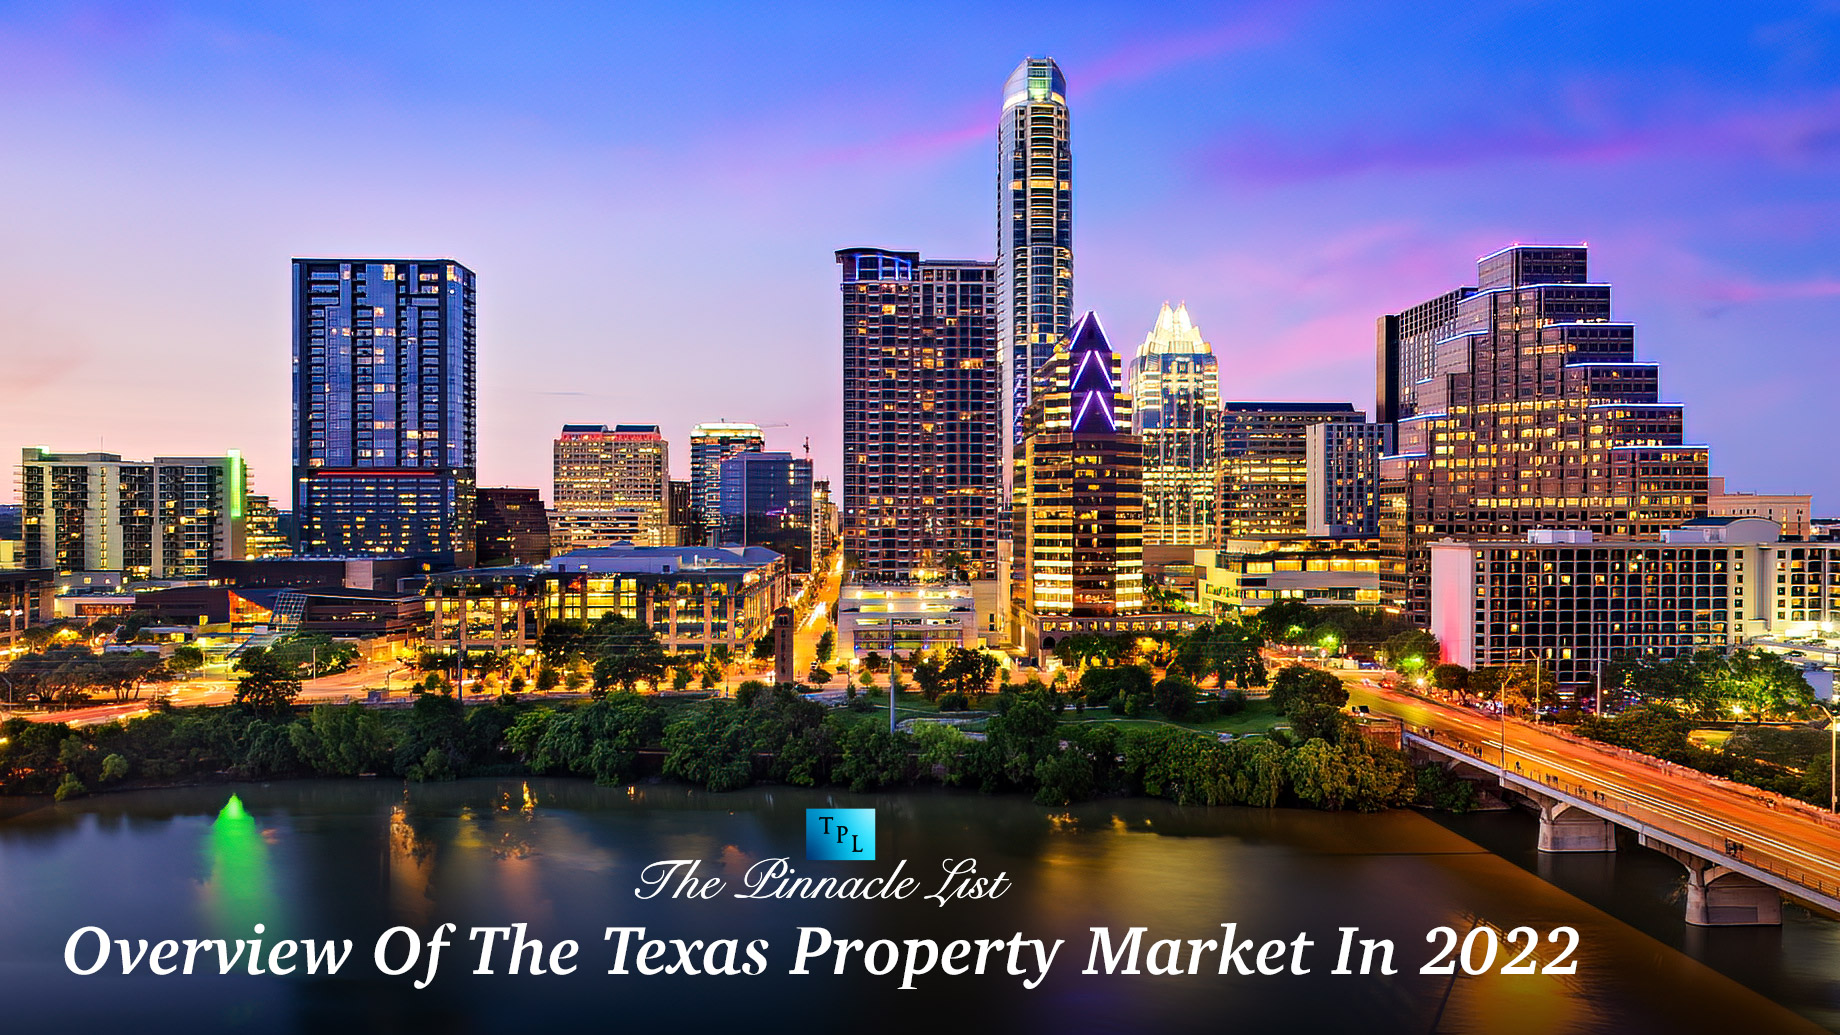 Overview Of The Texas Property Market In 2022